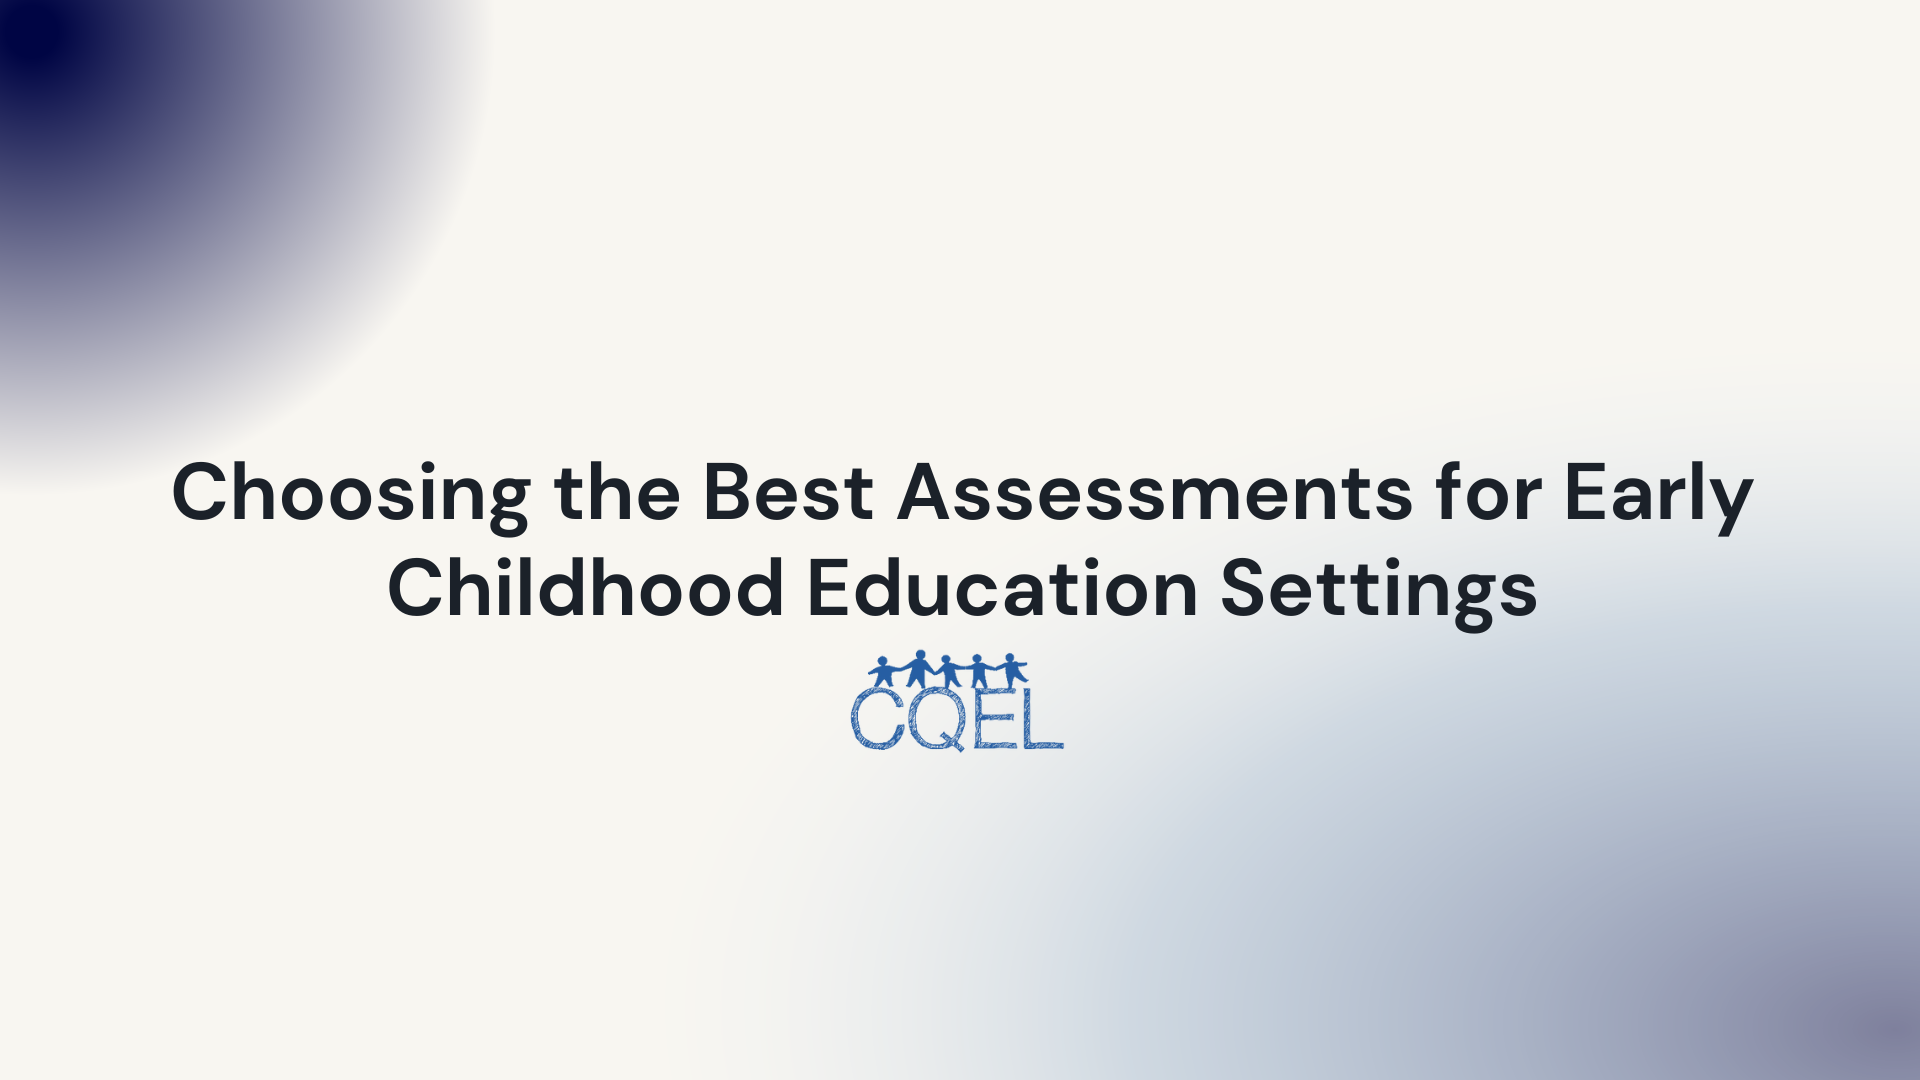 Choosing the Best Assessments for Early Childhood Education Settings